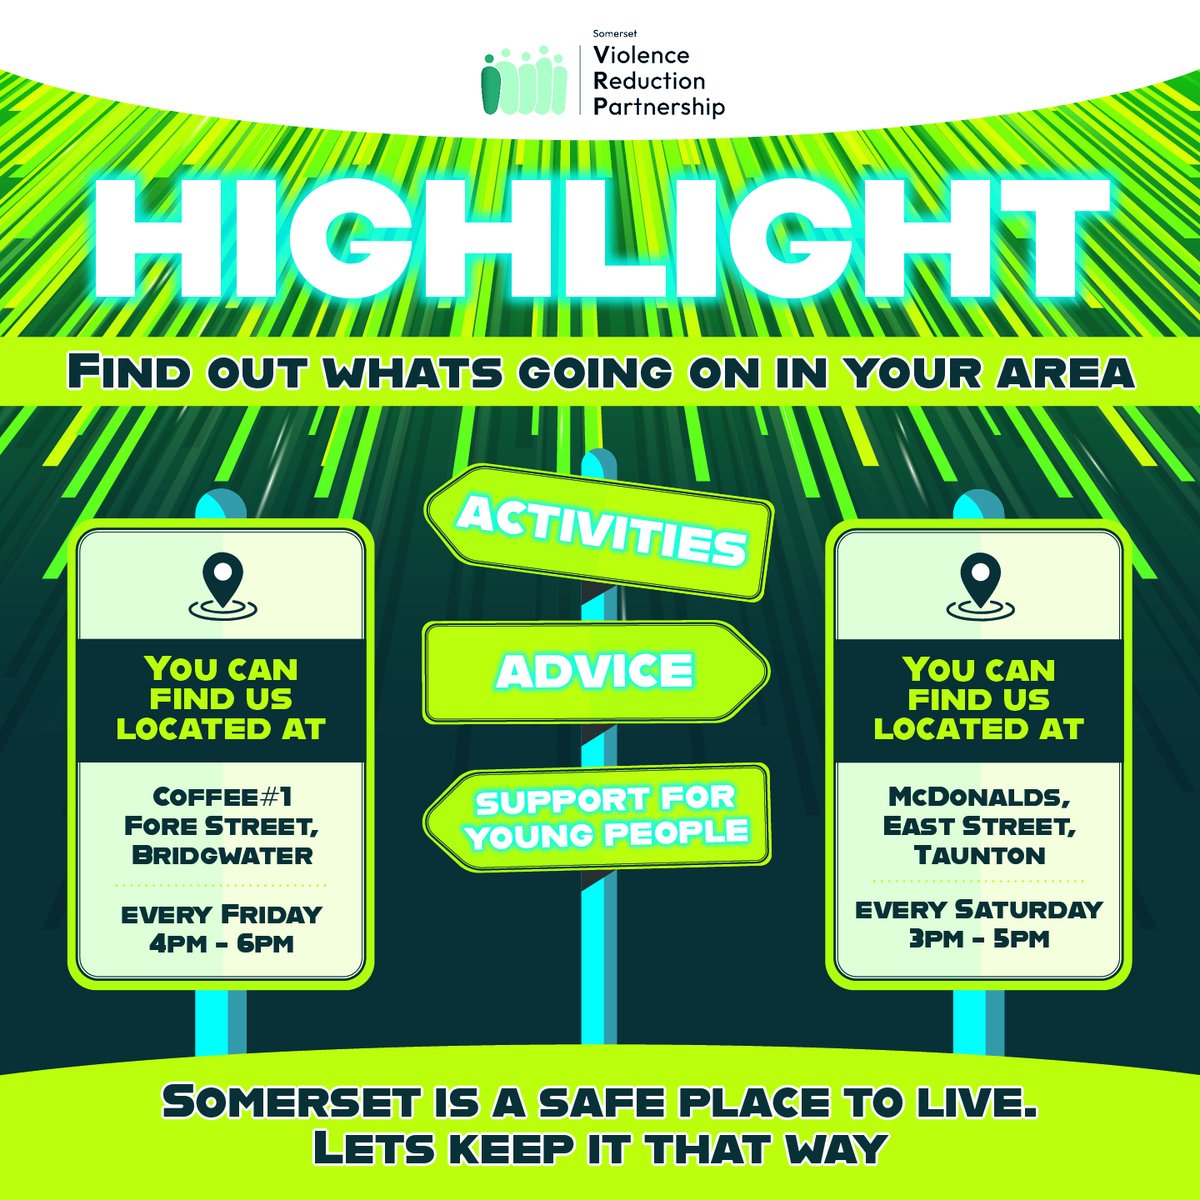 Worried about town centre violence? Don't forget to drop into our youth hub today in #Taunton between 3pm - 5pm. It is a safe space where young people, parents and guardians can get help and advice.